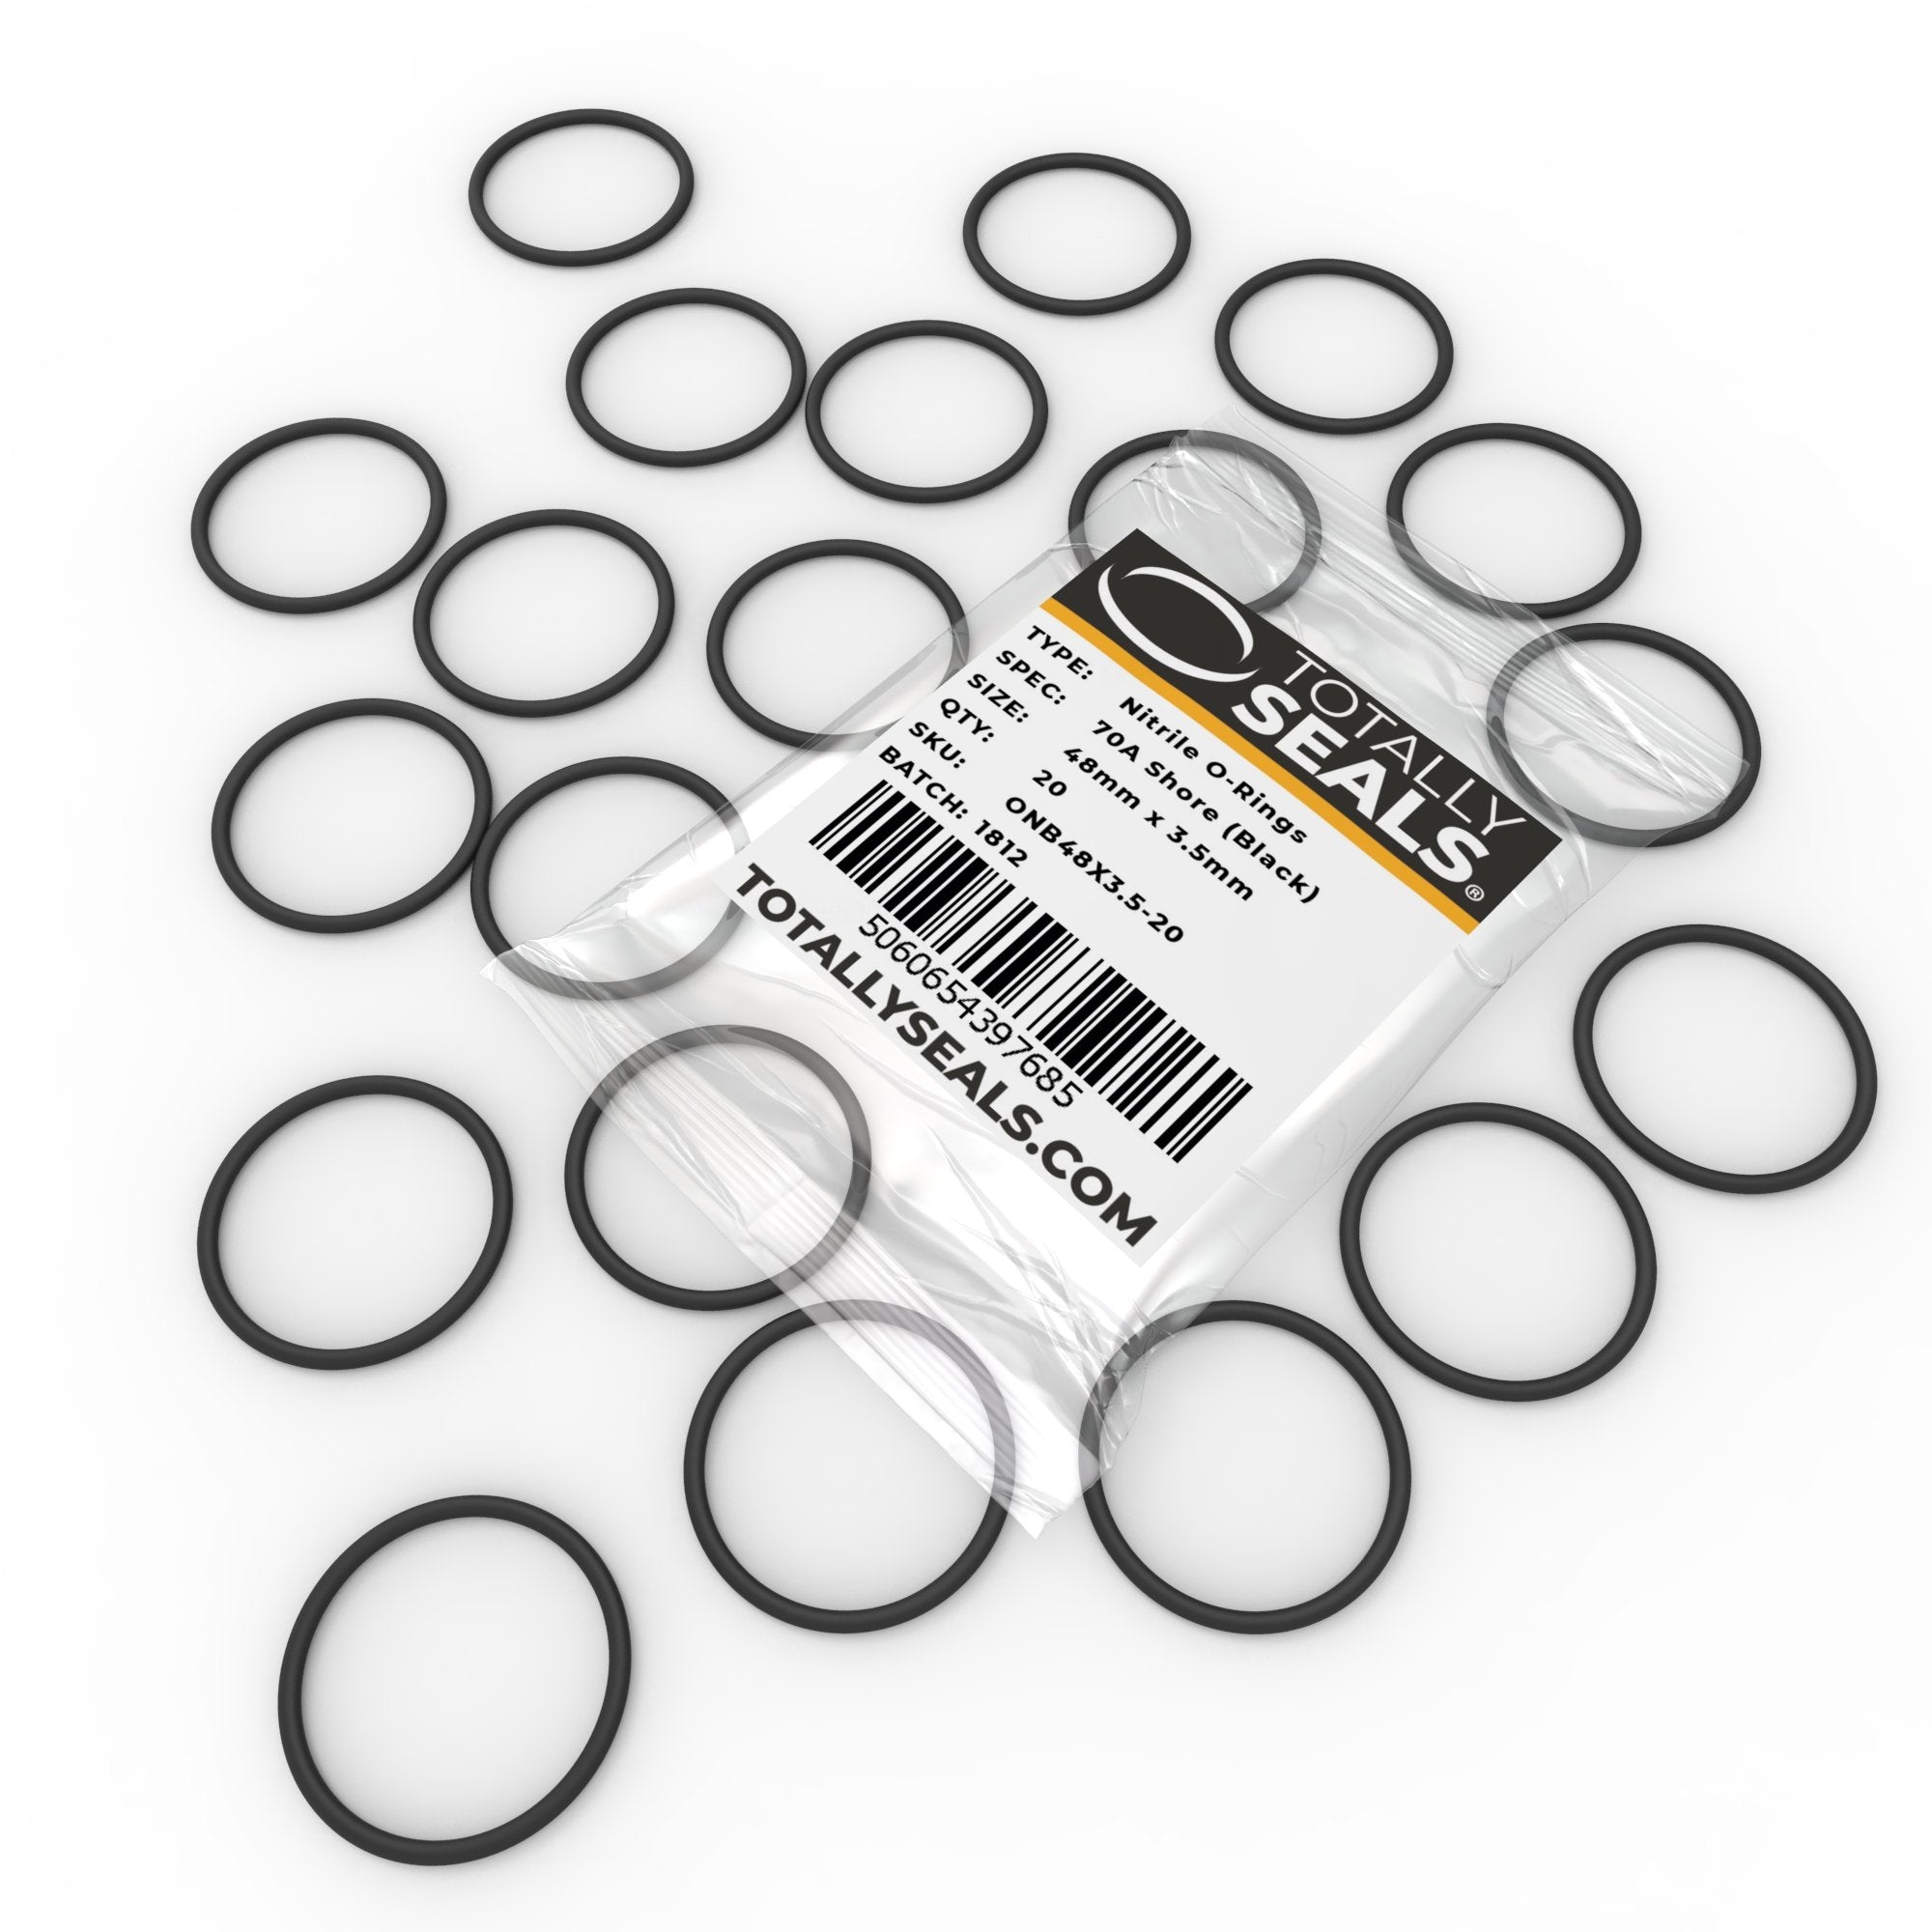 225pcs Rubber O Ring O-Ring Washer Seals Watertightness Assortment  Different Size With Plactic Box Kit Set - AliExpress